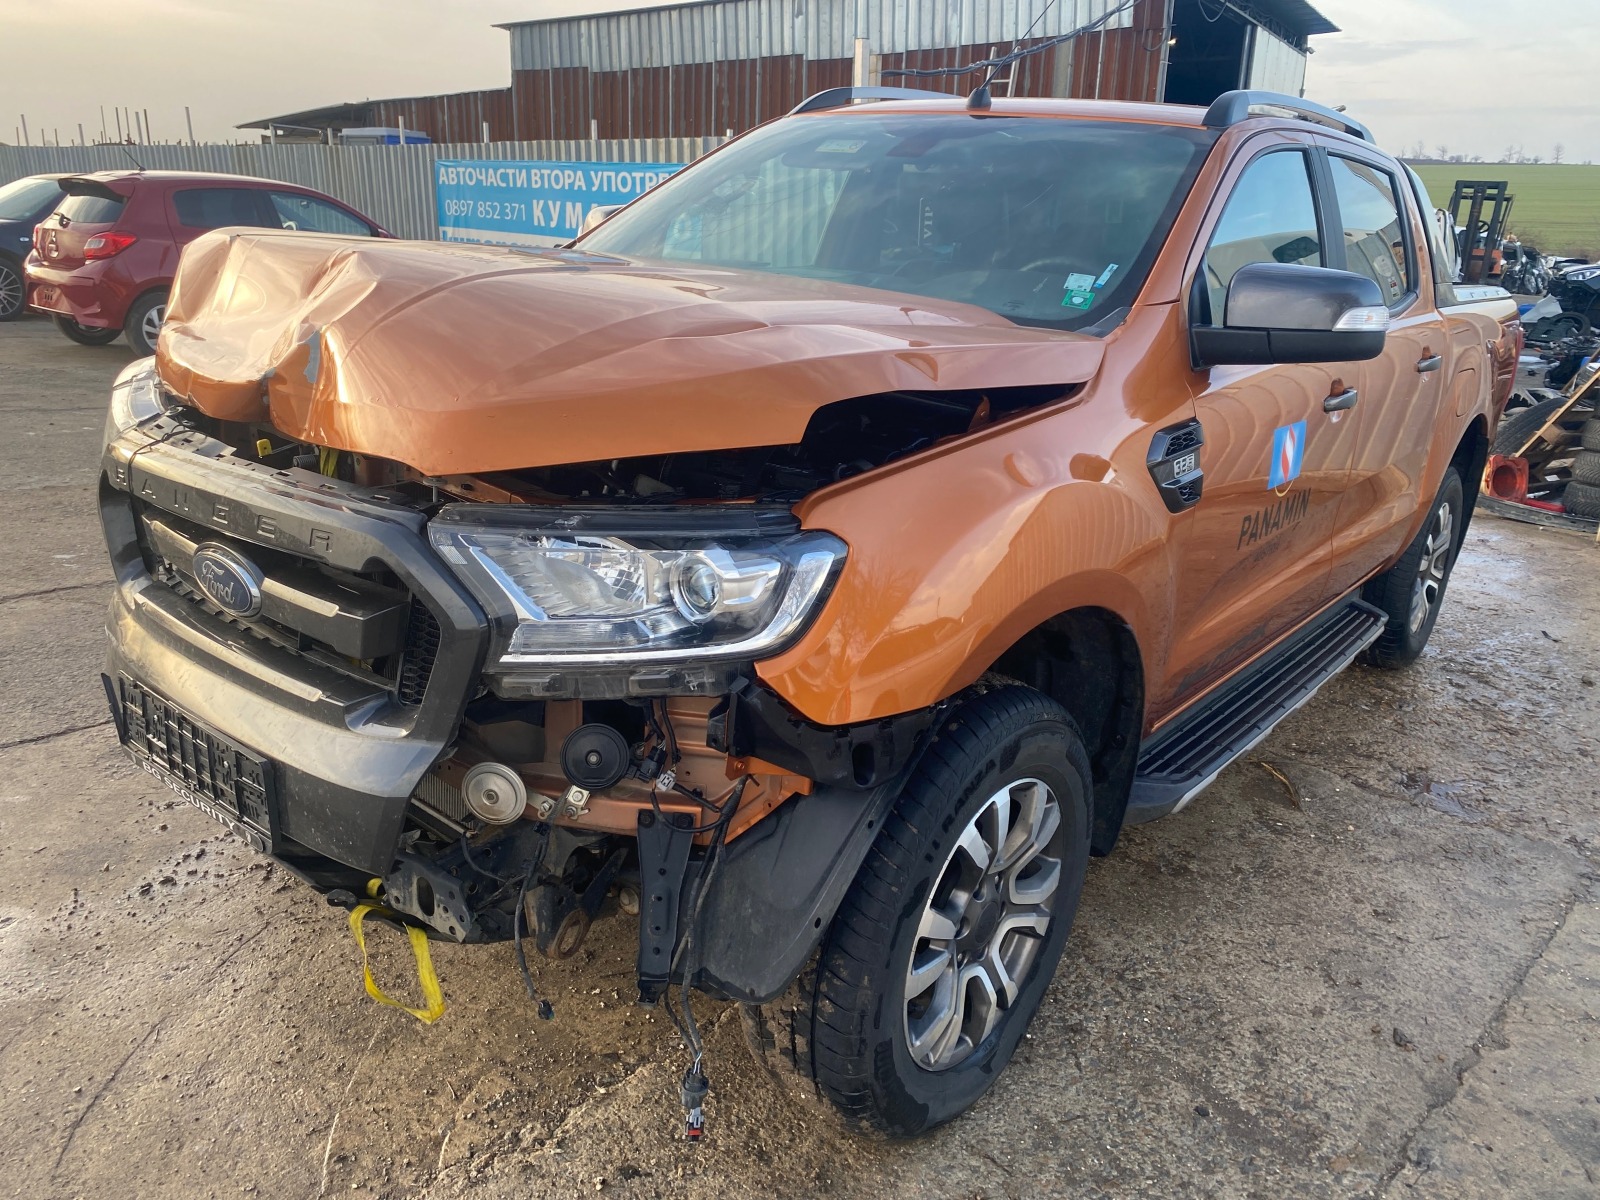 Ford Ranger 3.2 eco boost - [1] 